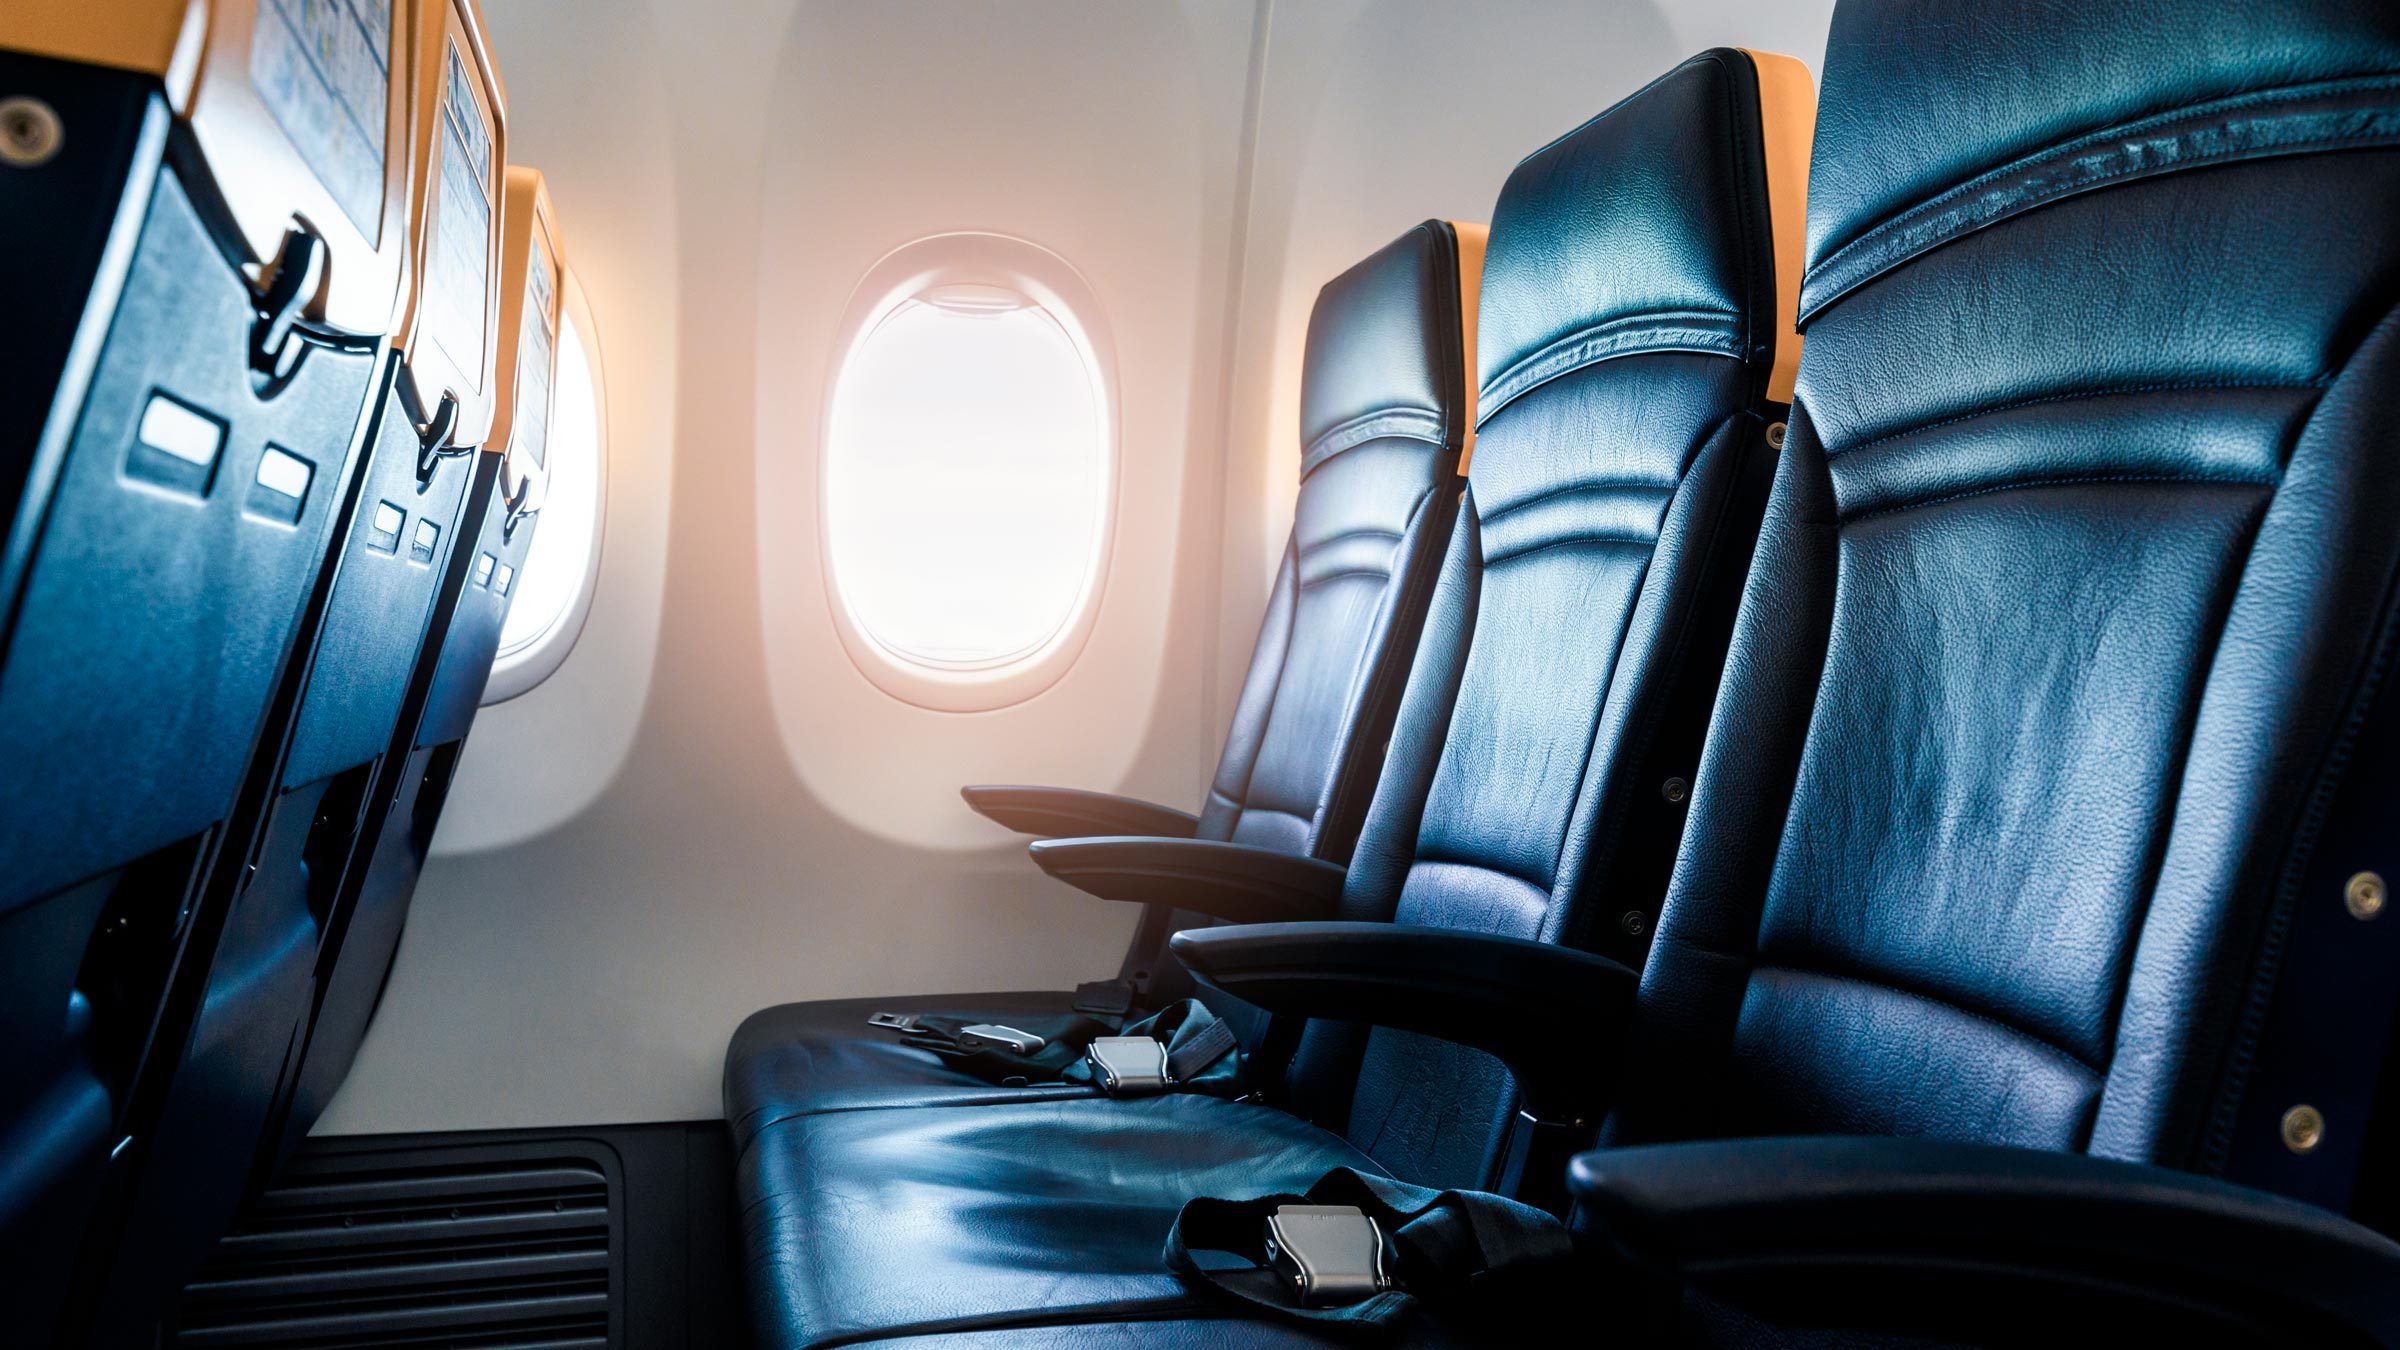 How to Lift the Armrest on Your Airplane Seat